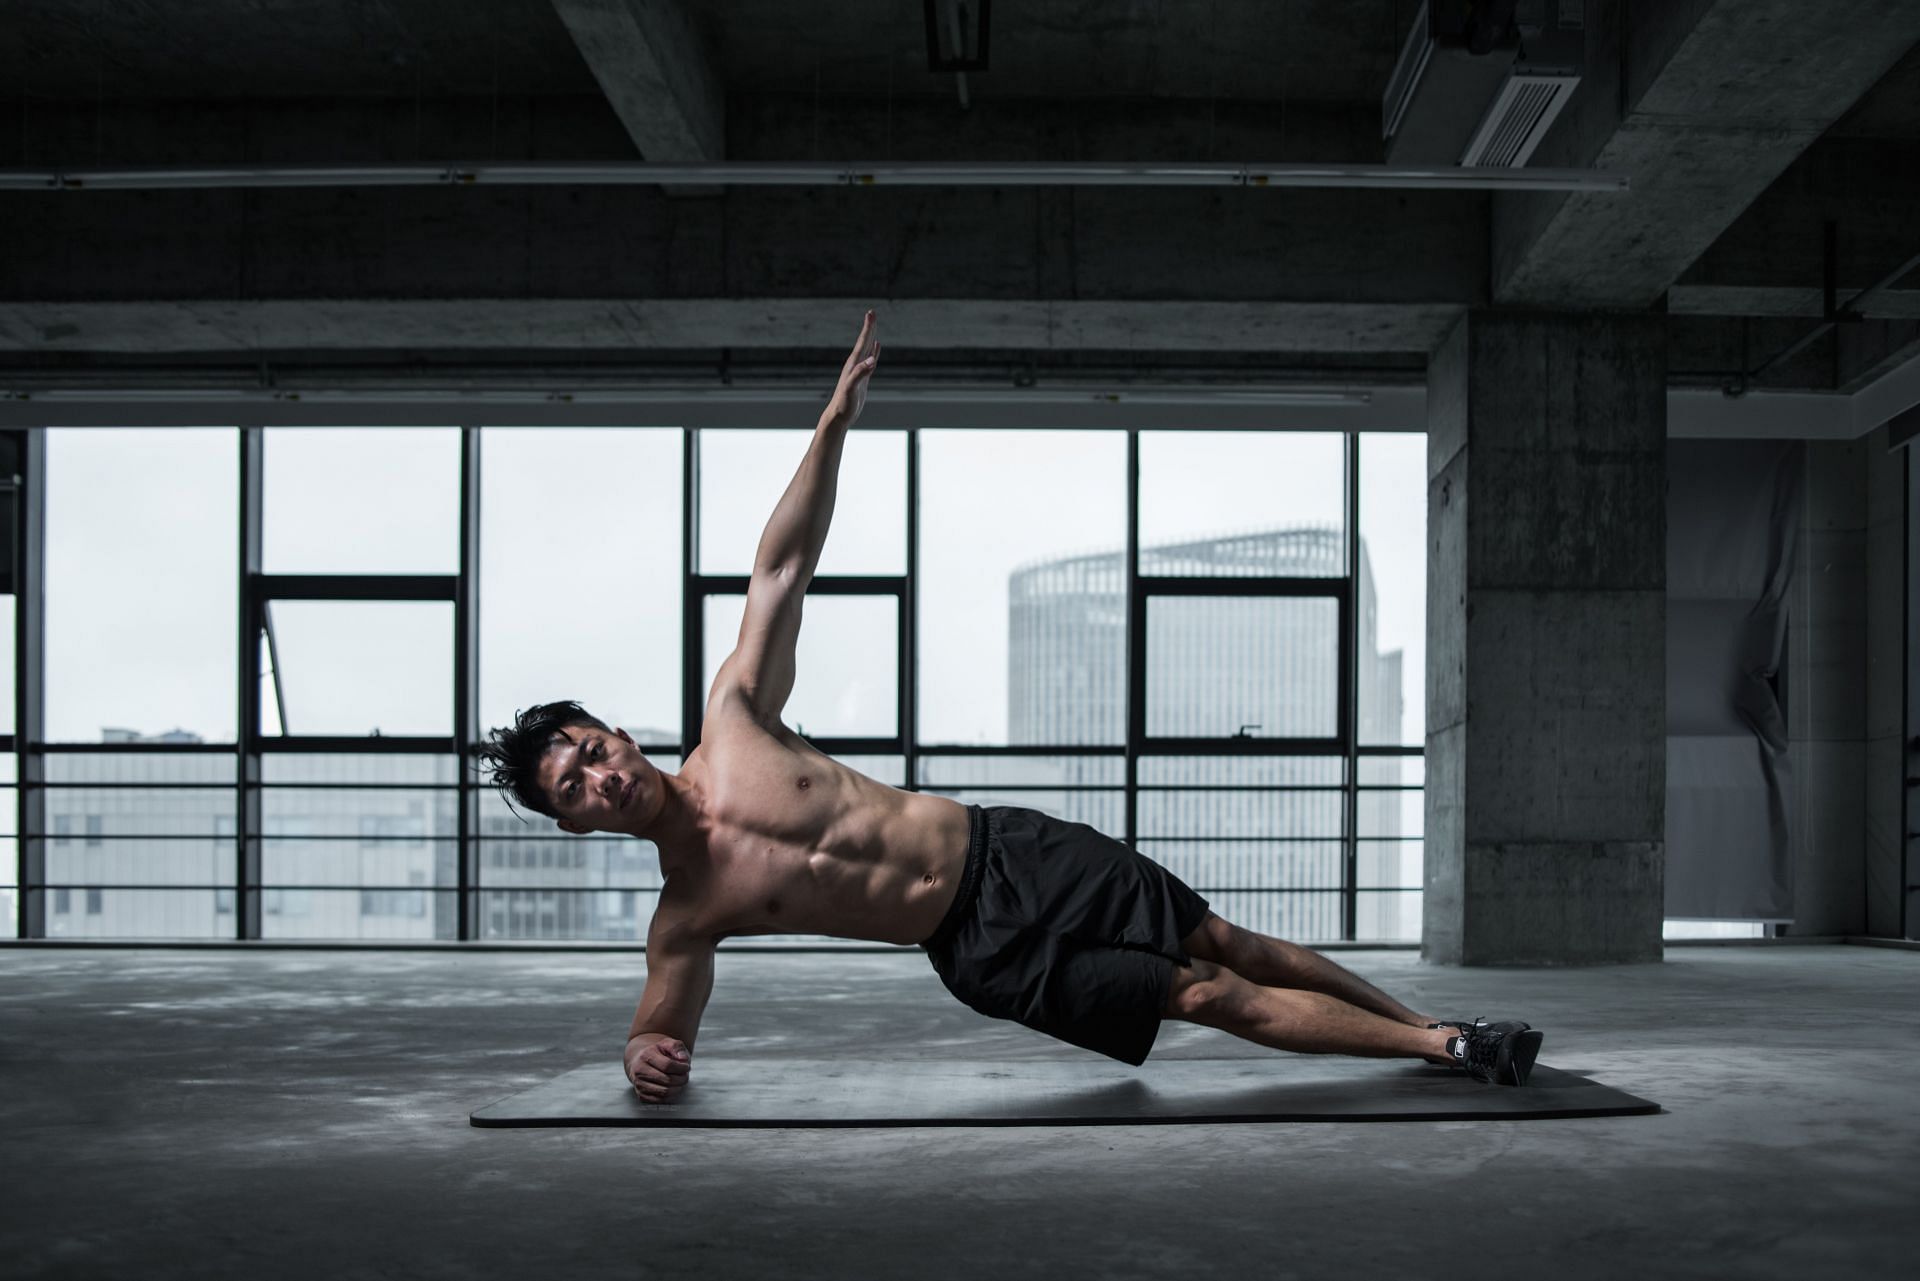 Muscular endurance exercises are as important as building the physique while working out. (Image by Li Sun / Pexels)